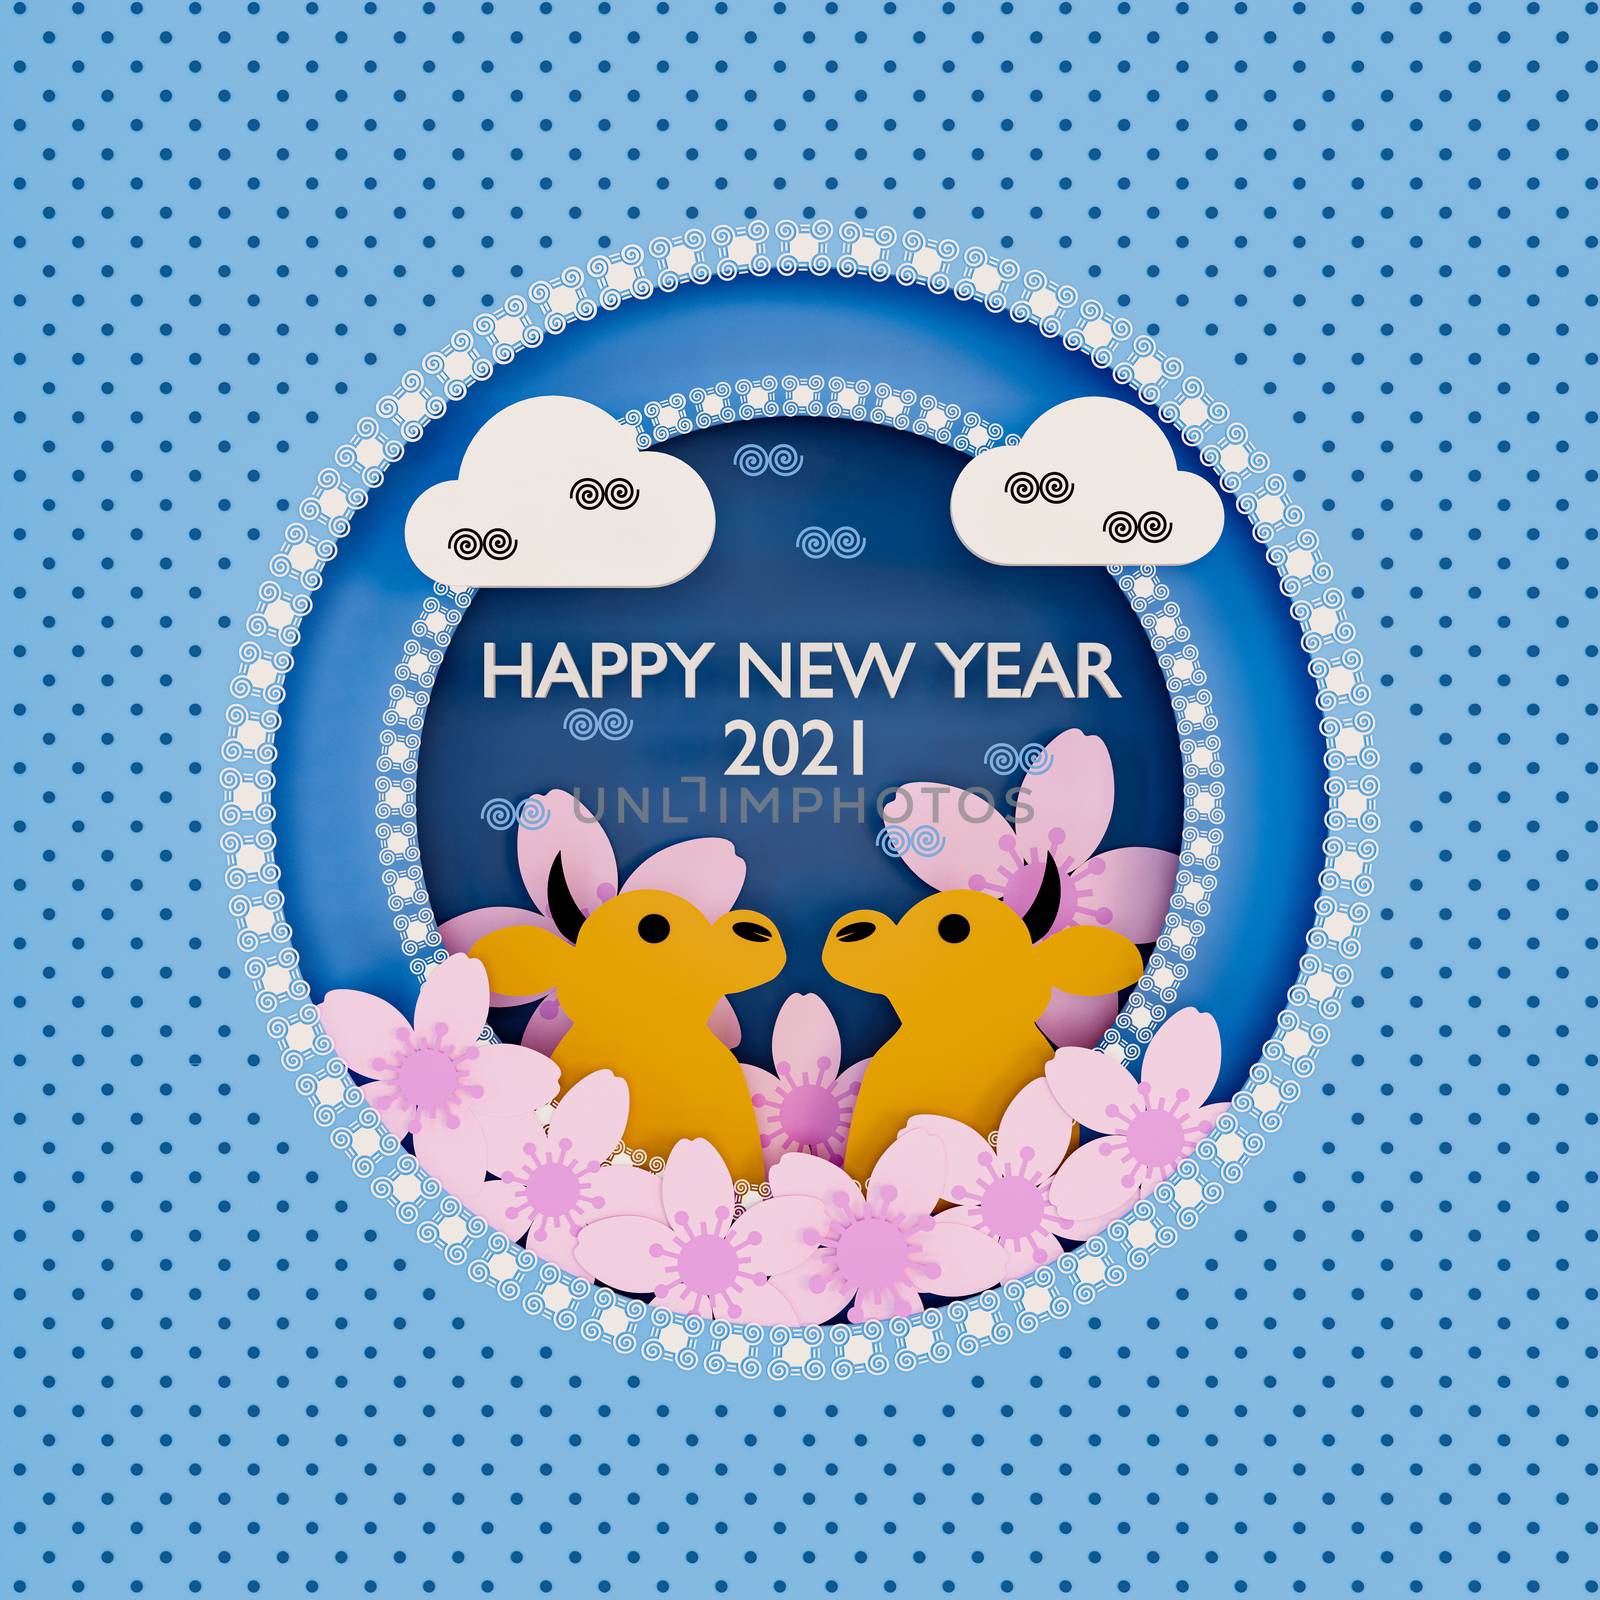 An illustration of cute baby cow models with pink cherry blossoms and oriental elements on blue background. Happy New Year 2021 card.